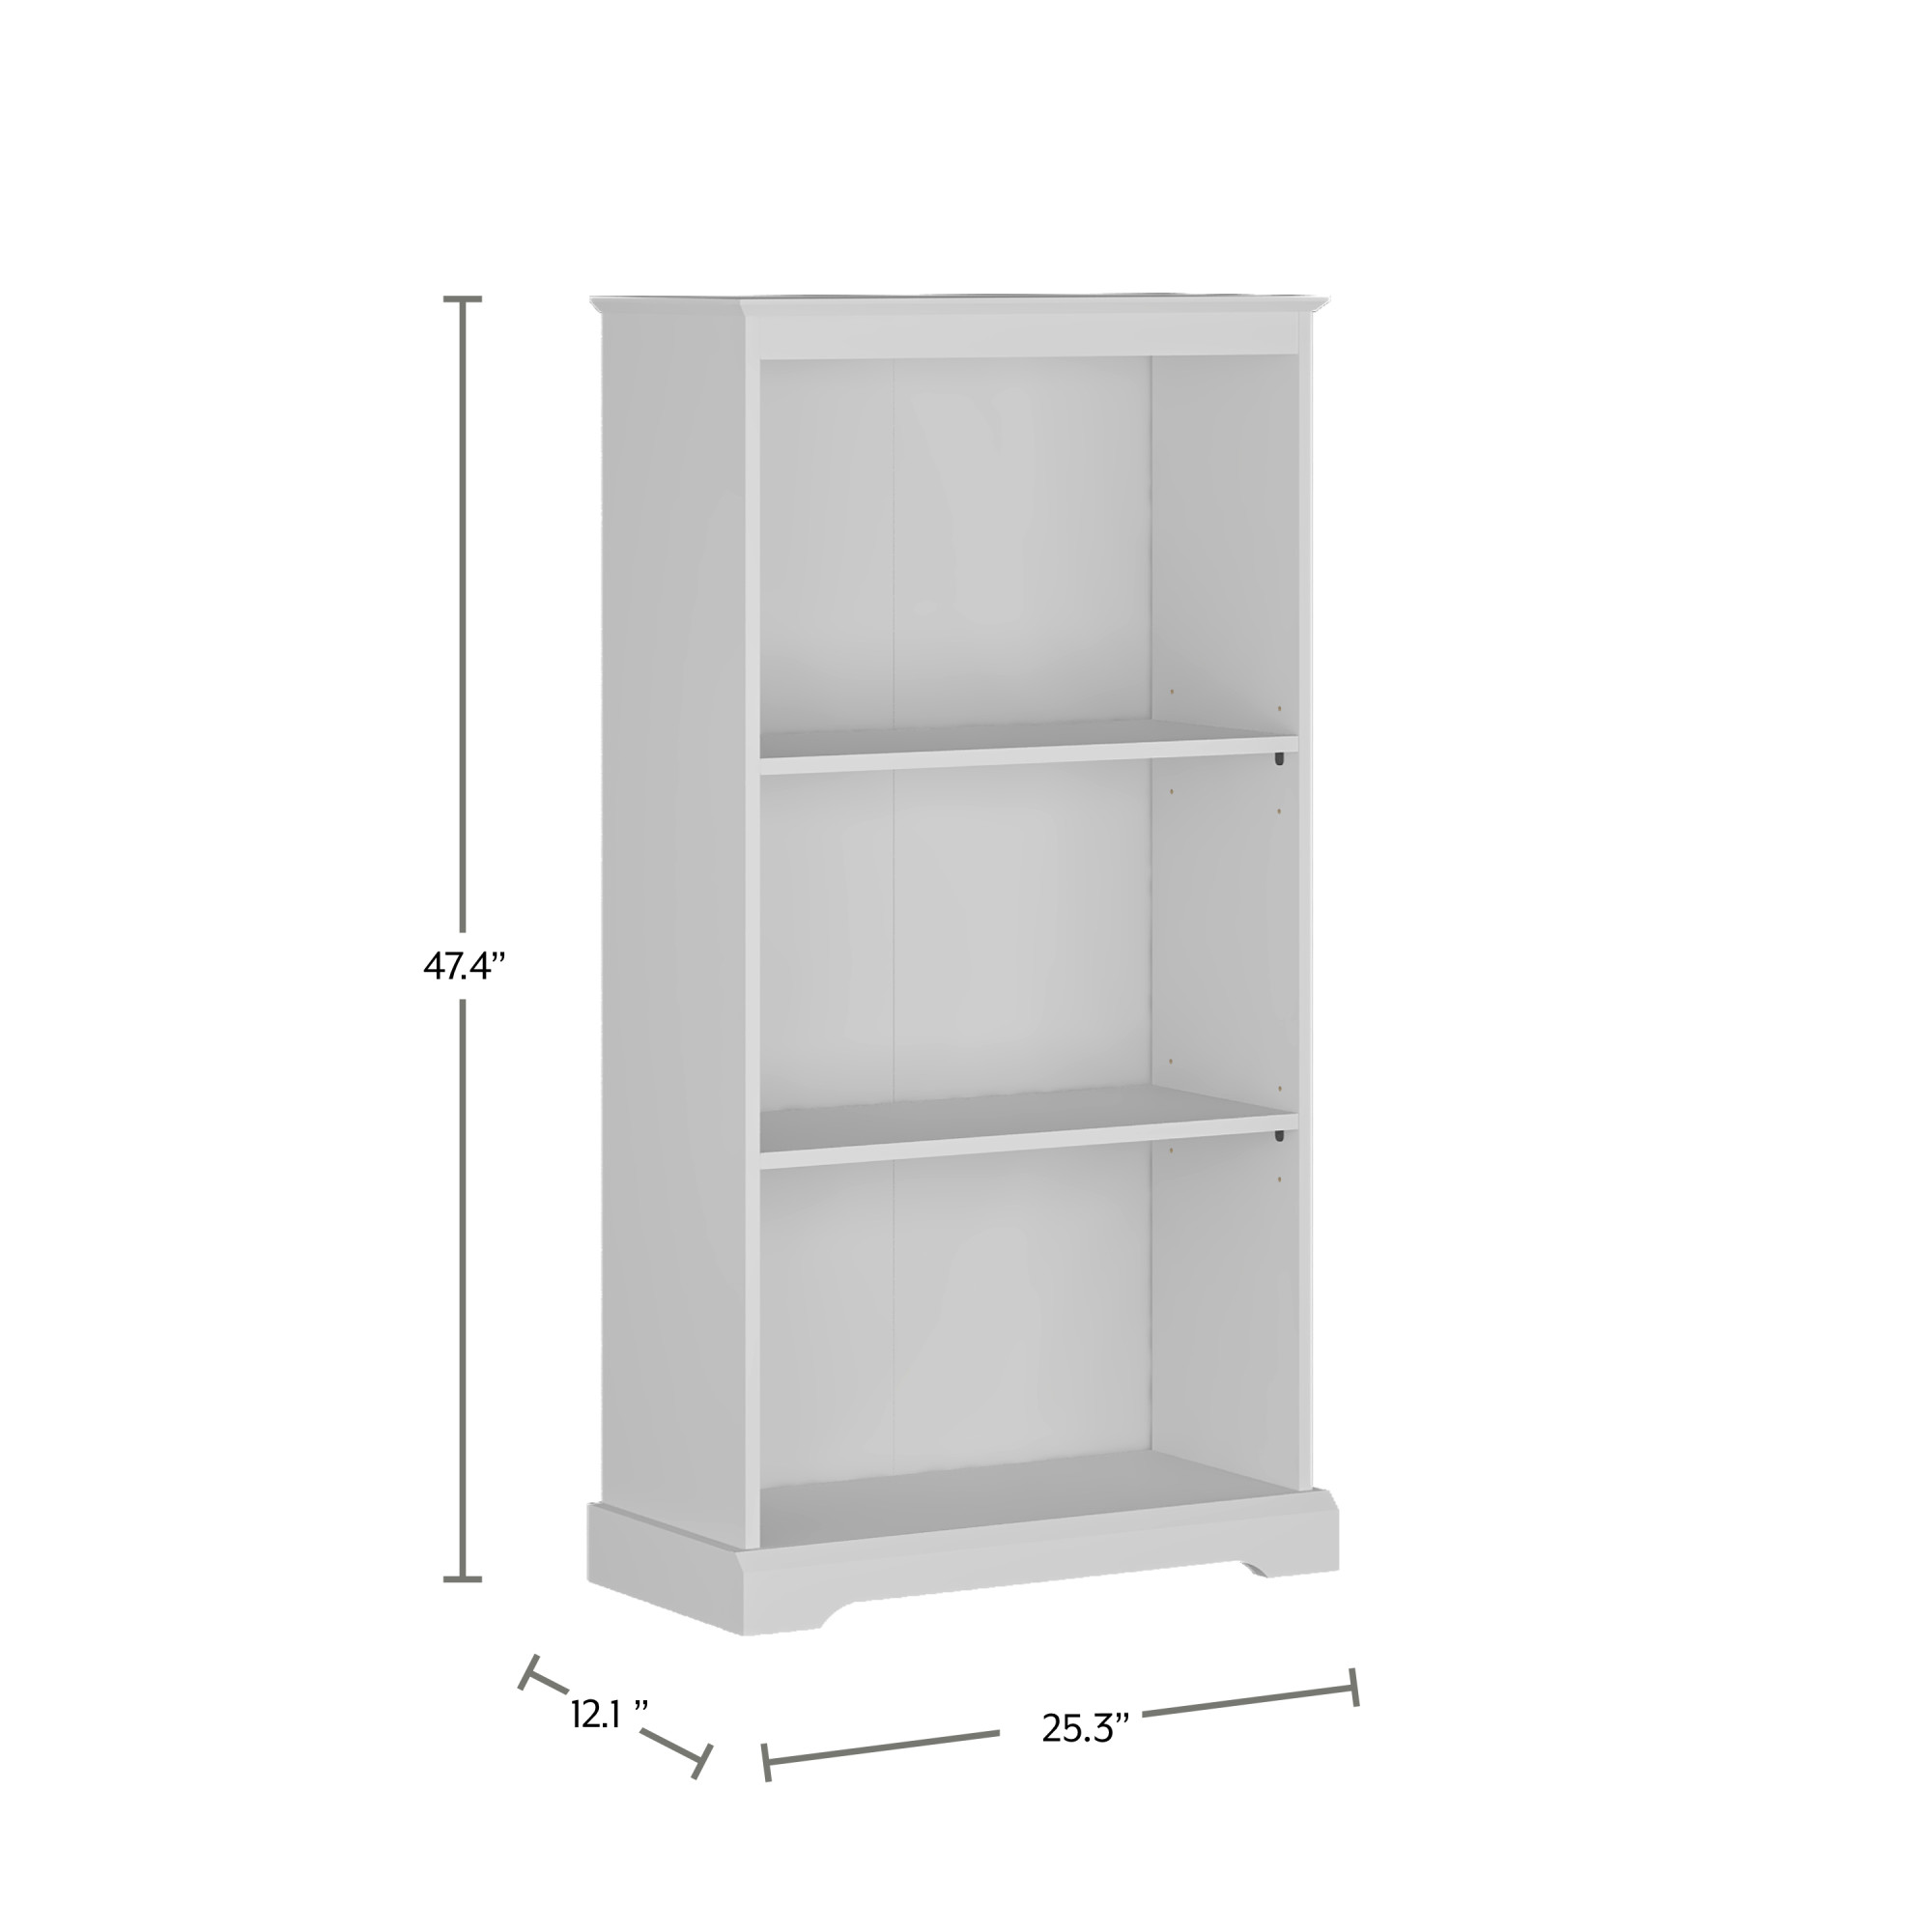 Hillsdale Campbell Wood 3 Shelf Kids Bookcase, White - image 3 of 11